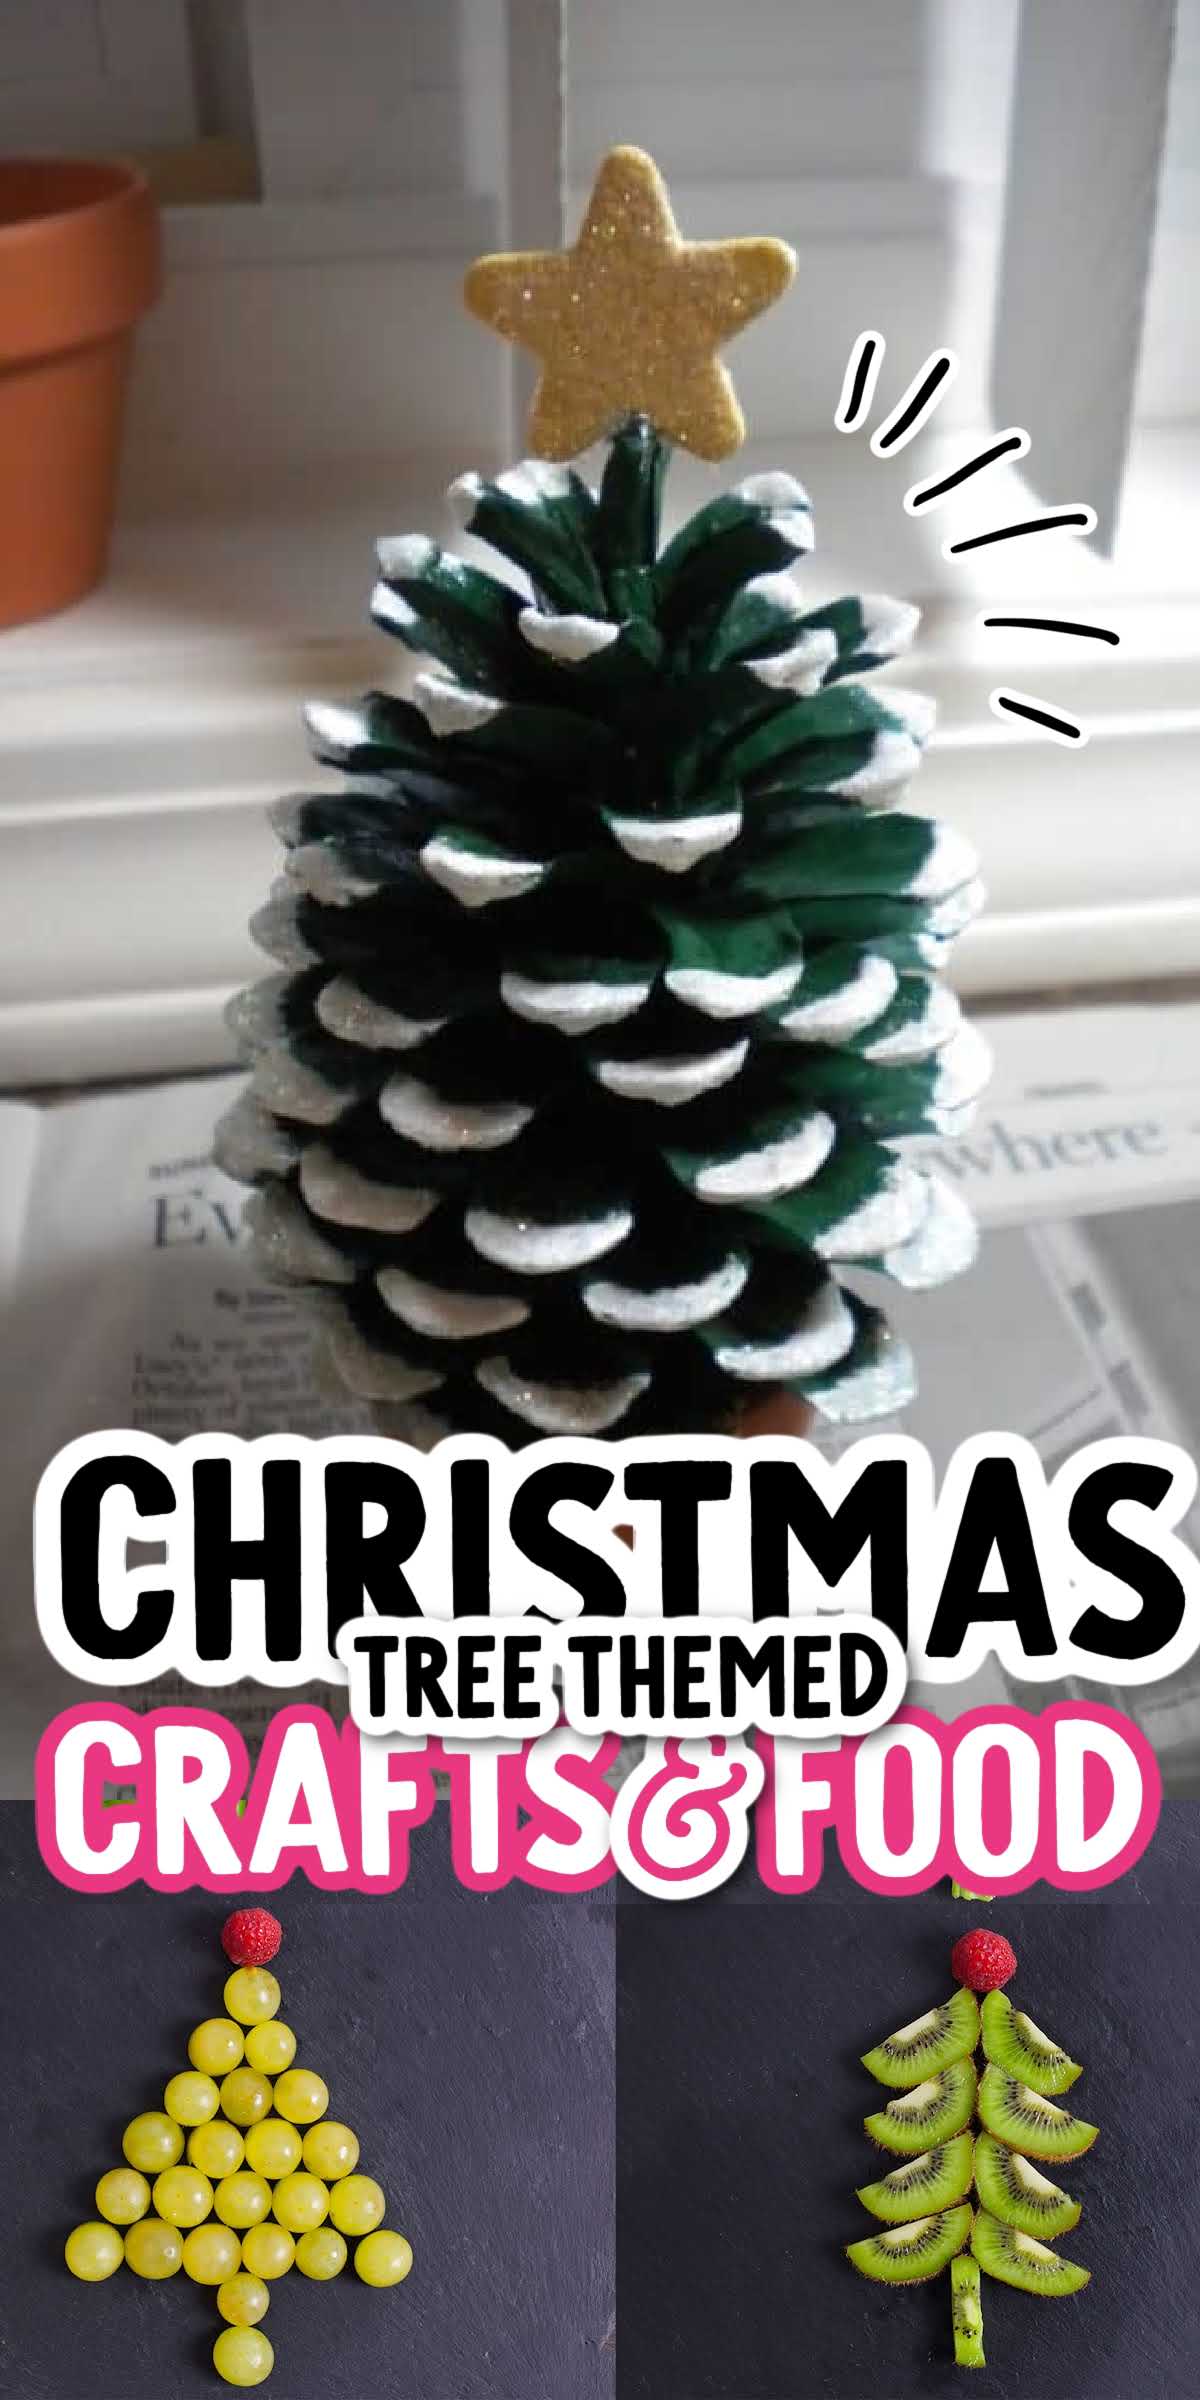 Christmas Tree-Themed Crafts & Food - Spaceships and Laser Beams